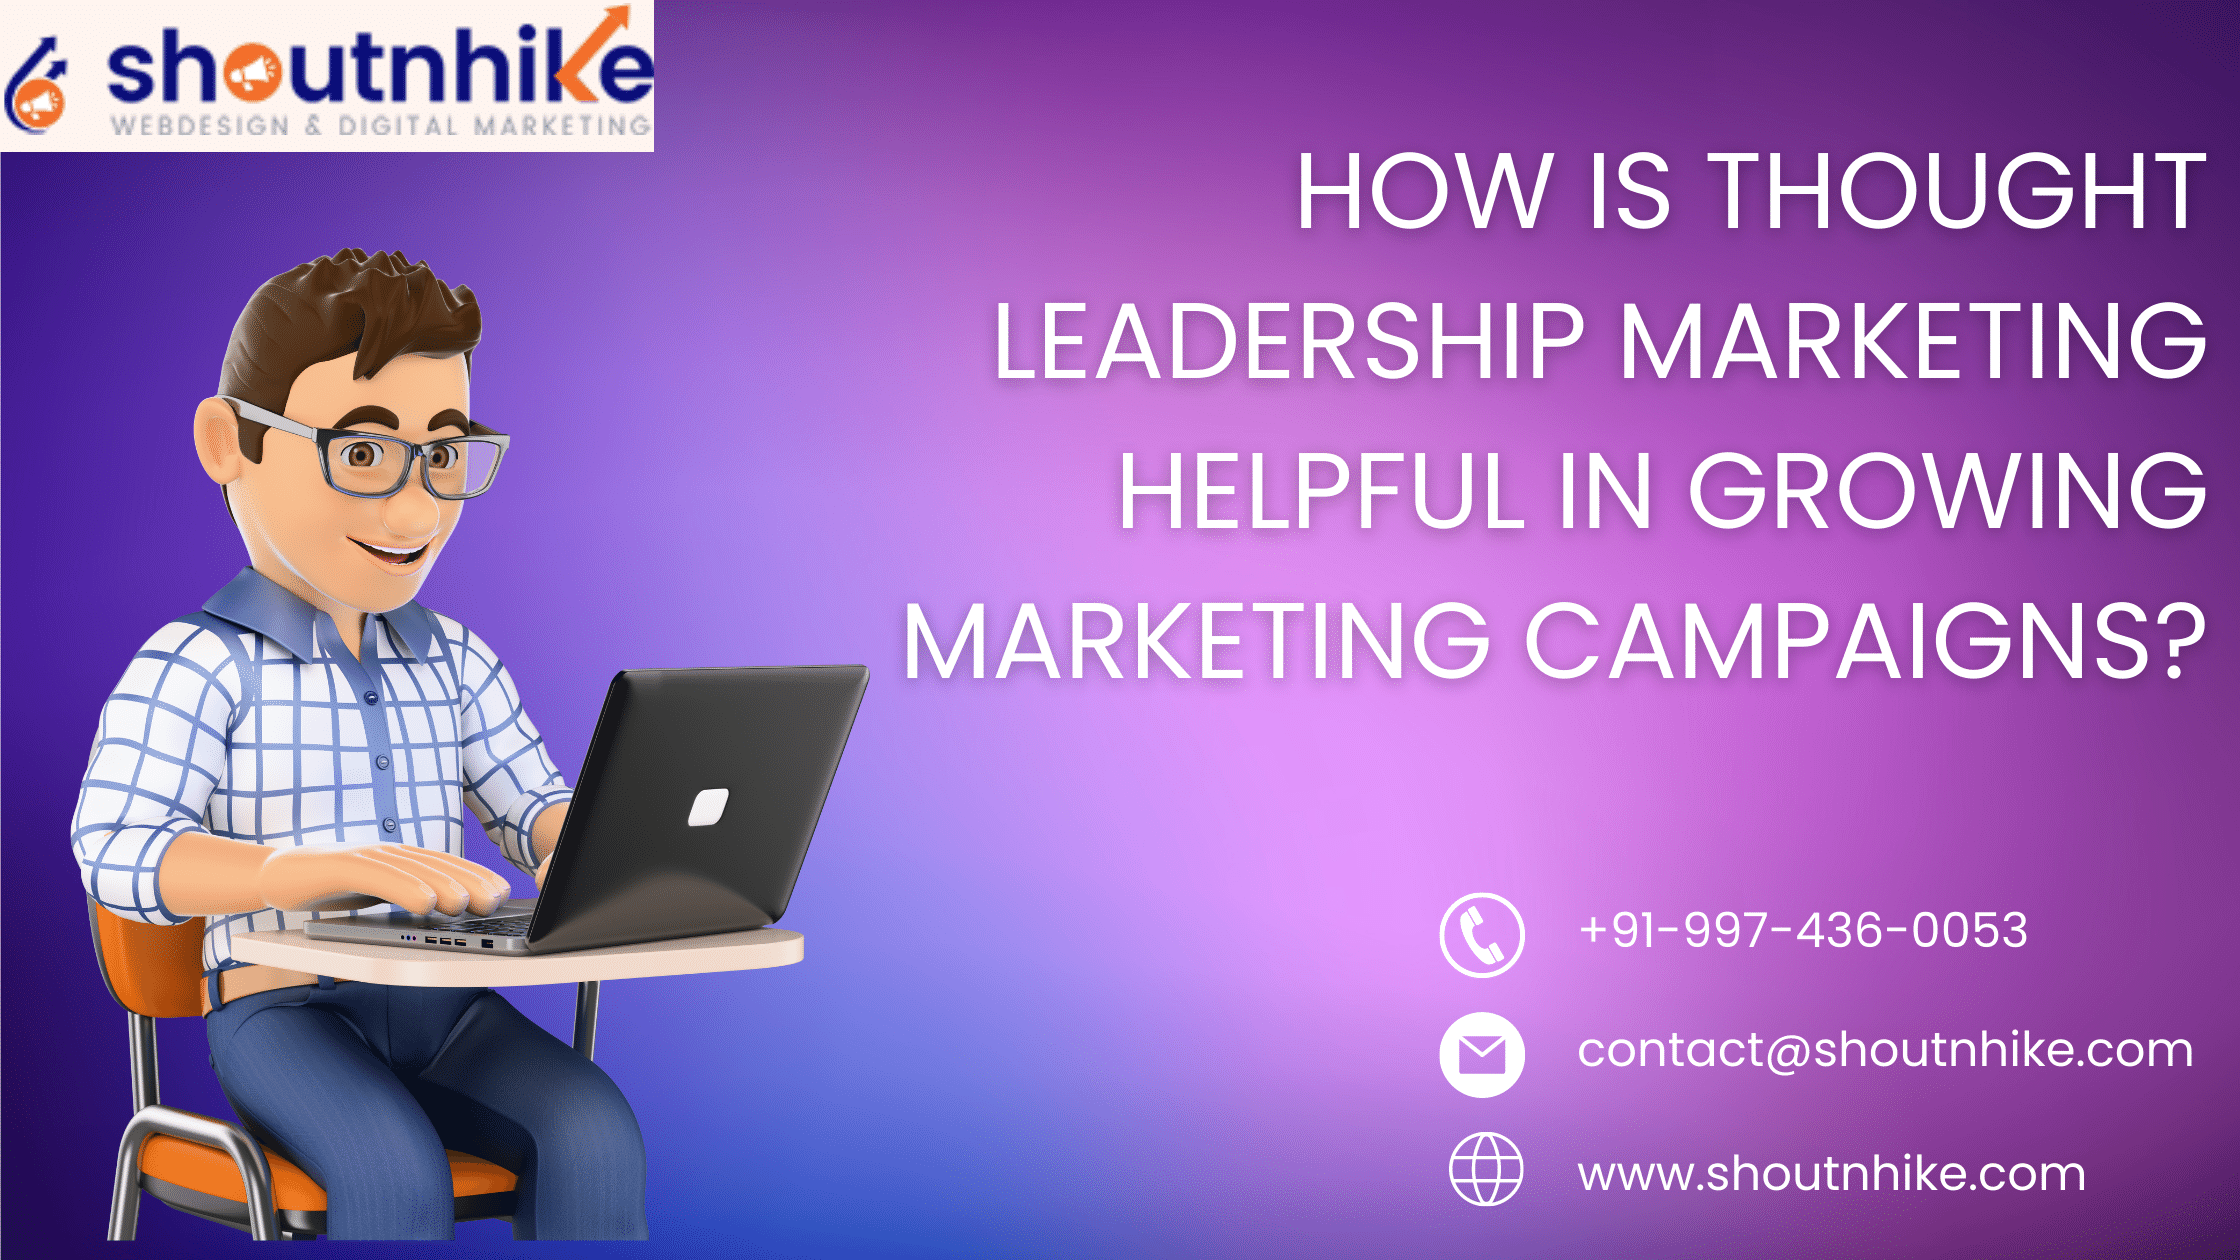 How is Thought Leadership Marketing Helpful in Growing Marketing Campaigns?